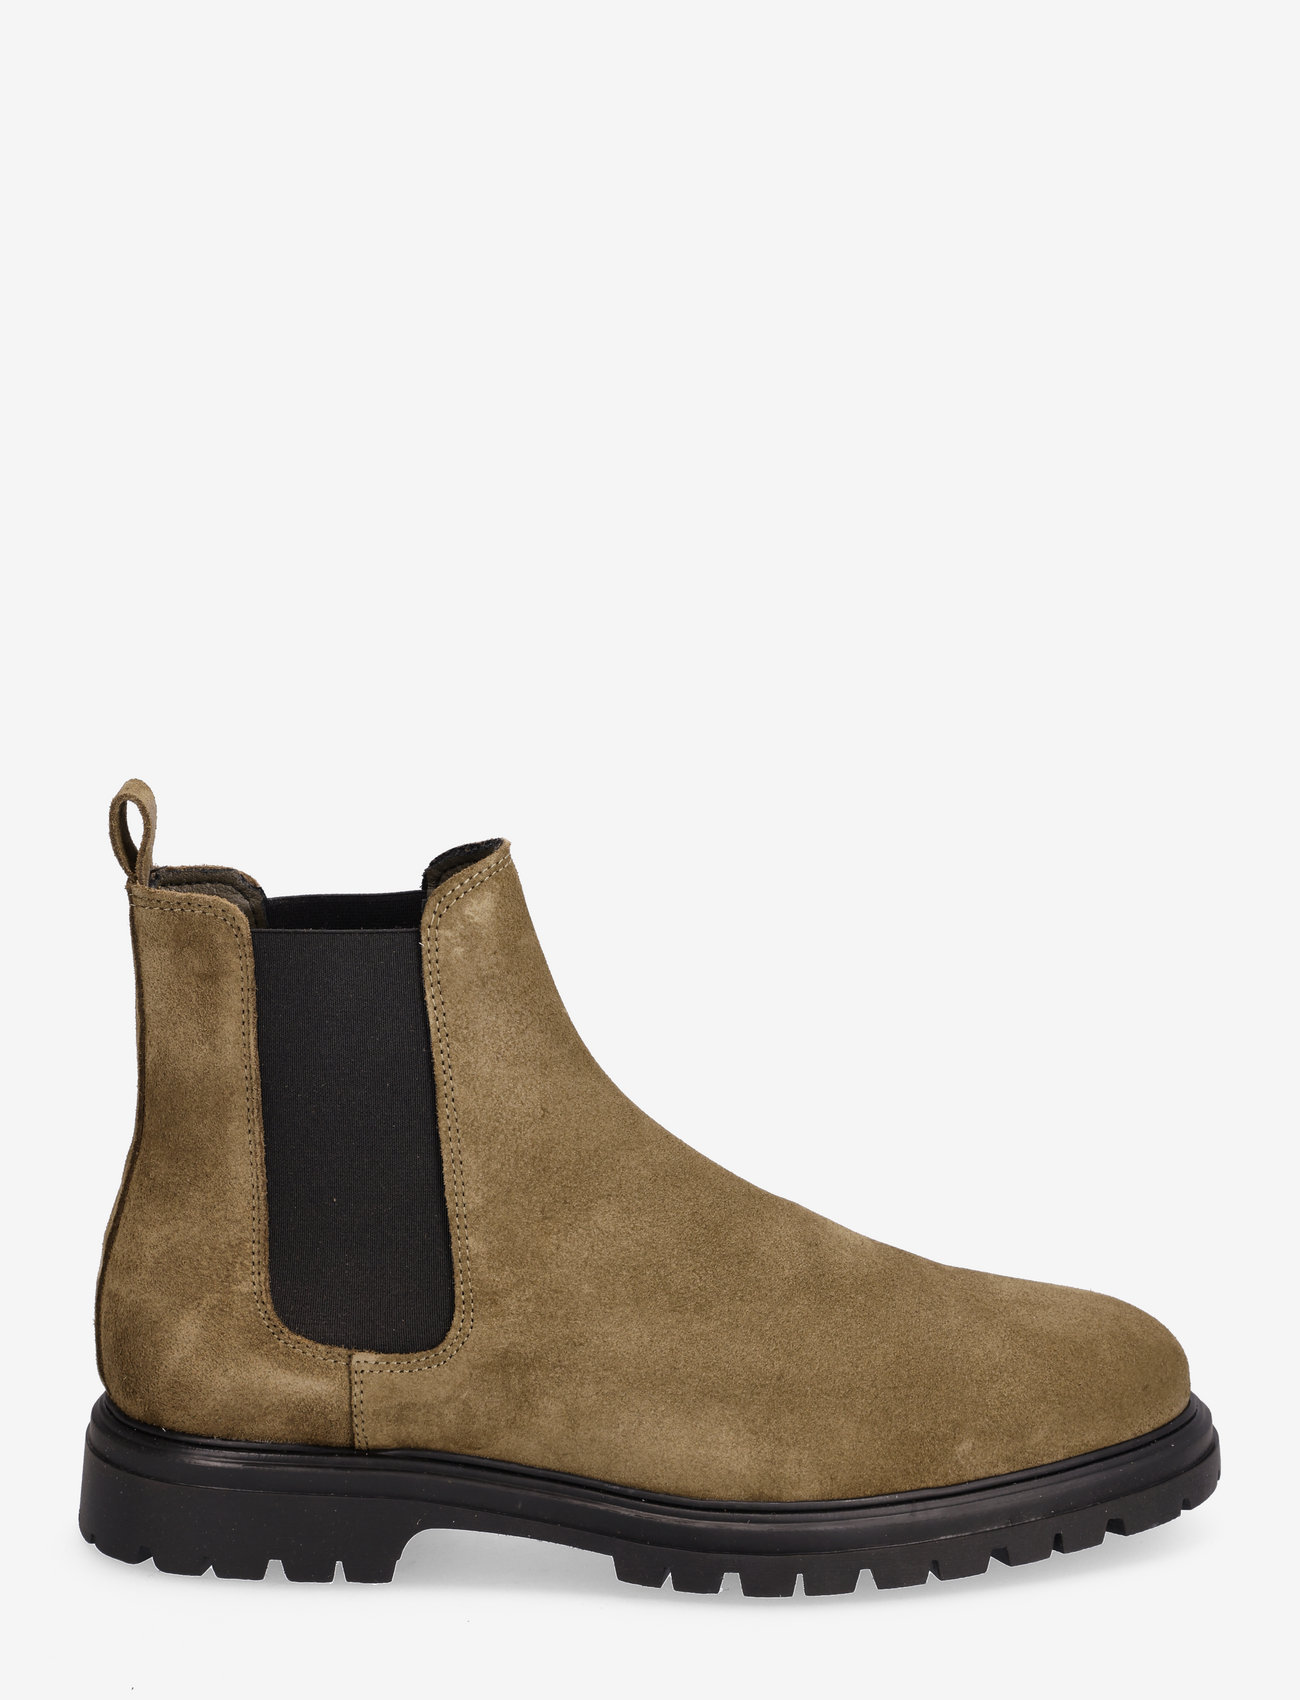 Bianco - BIAGIL Chelsea Boot Suede - light olive - 1